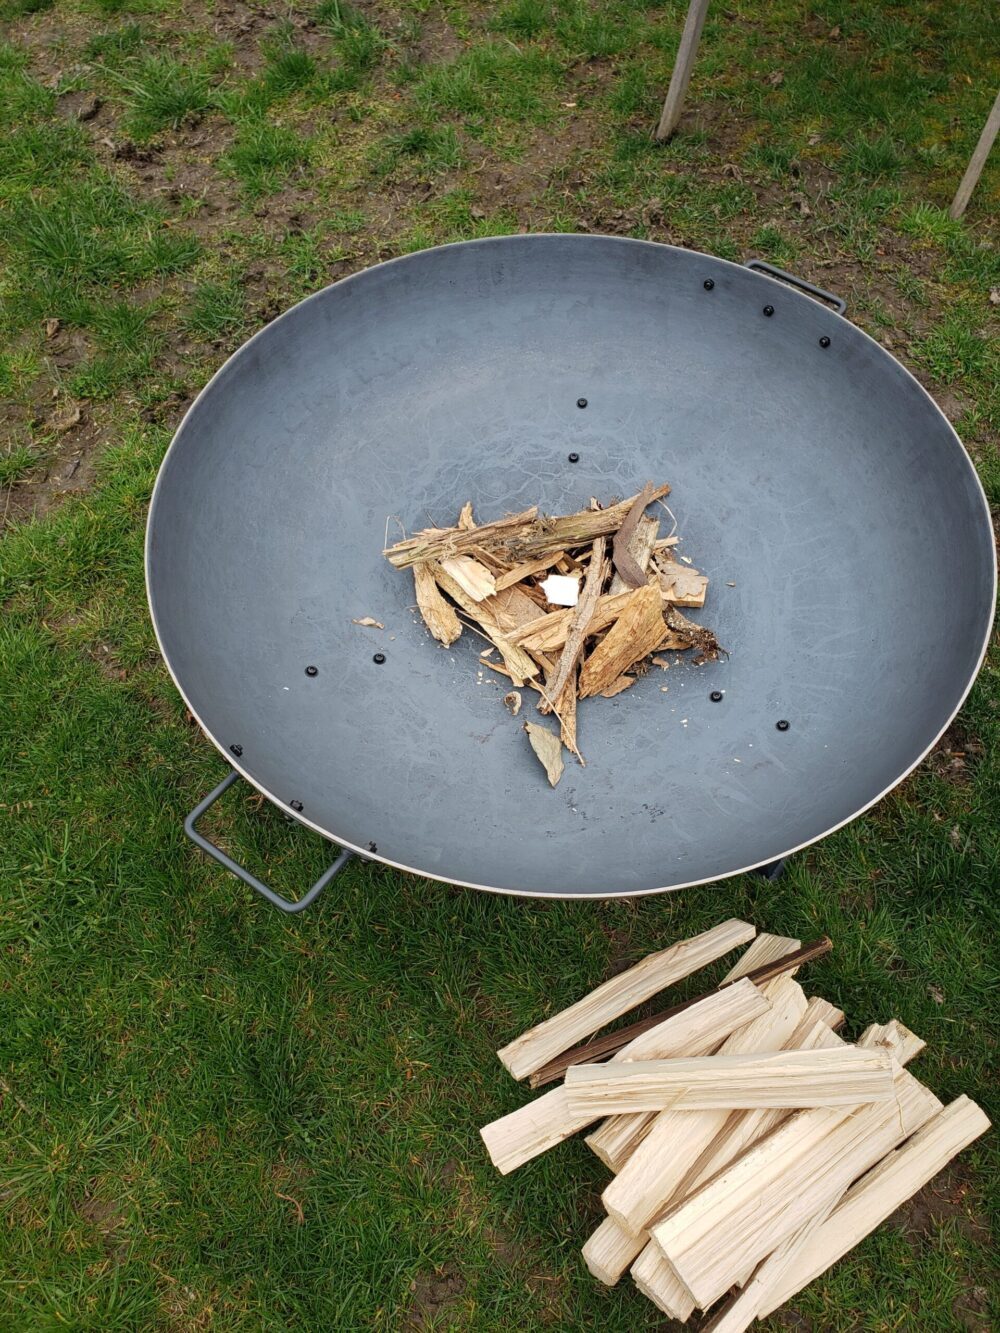 How To Start A Fire In Pit, How To Start A Fire Pit